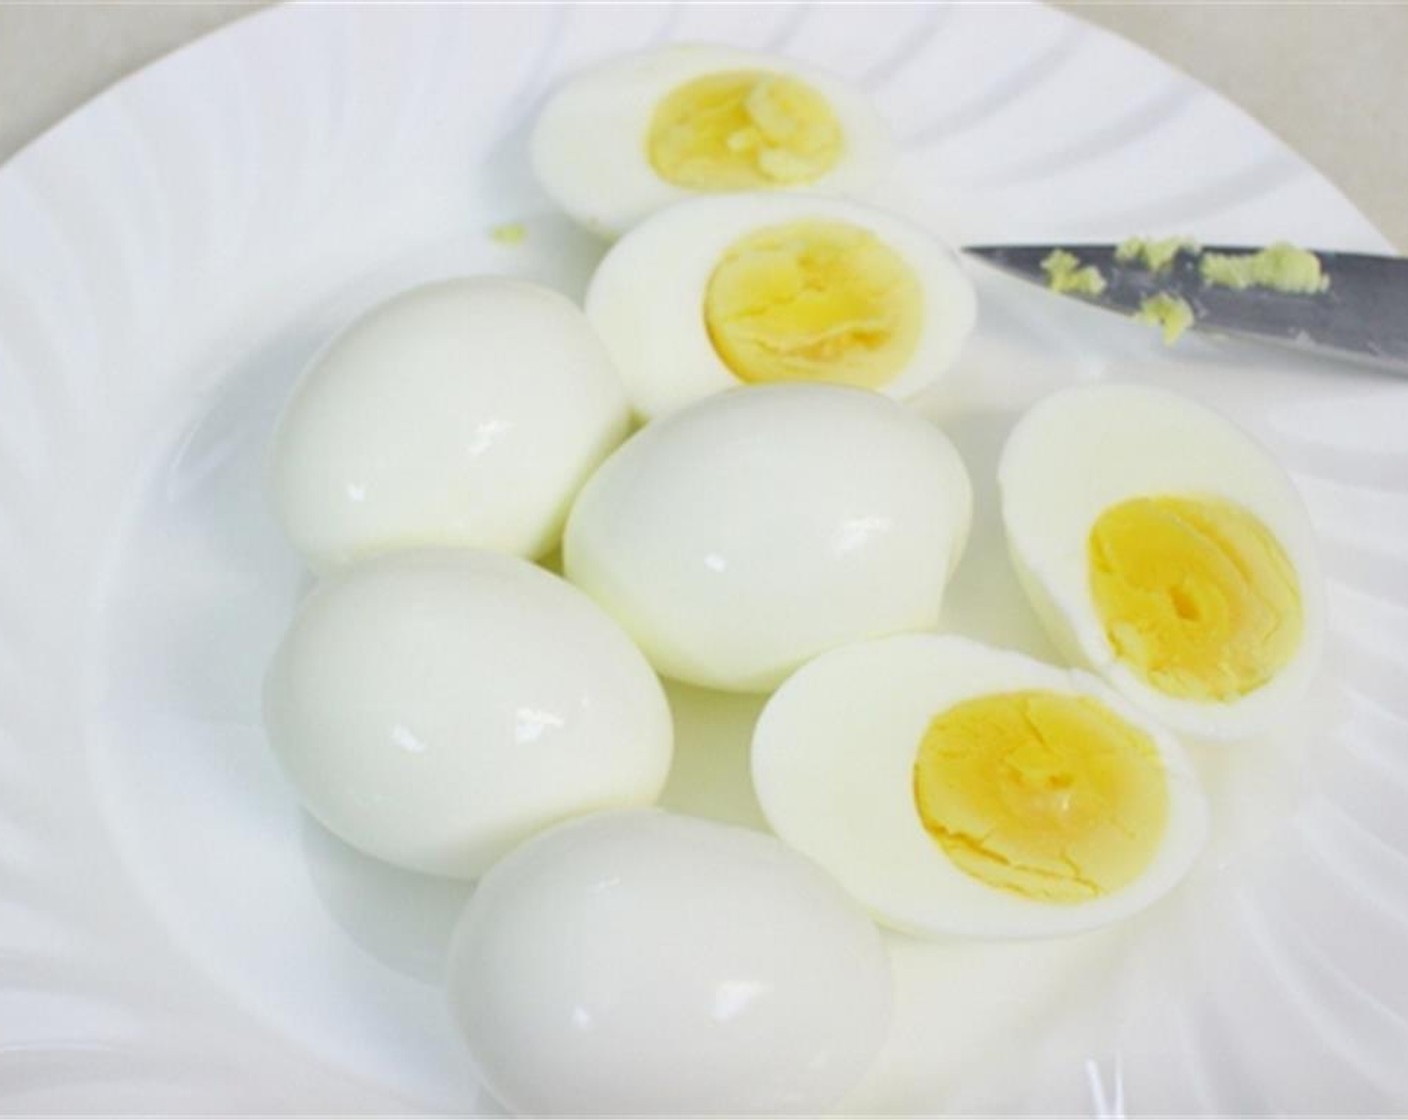 step 5 Hard boil the whole Eggs (6). Peel the eggs and cut them in half to separate the egg whites from the egg yolks.